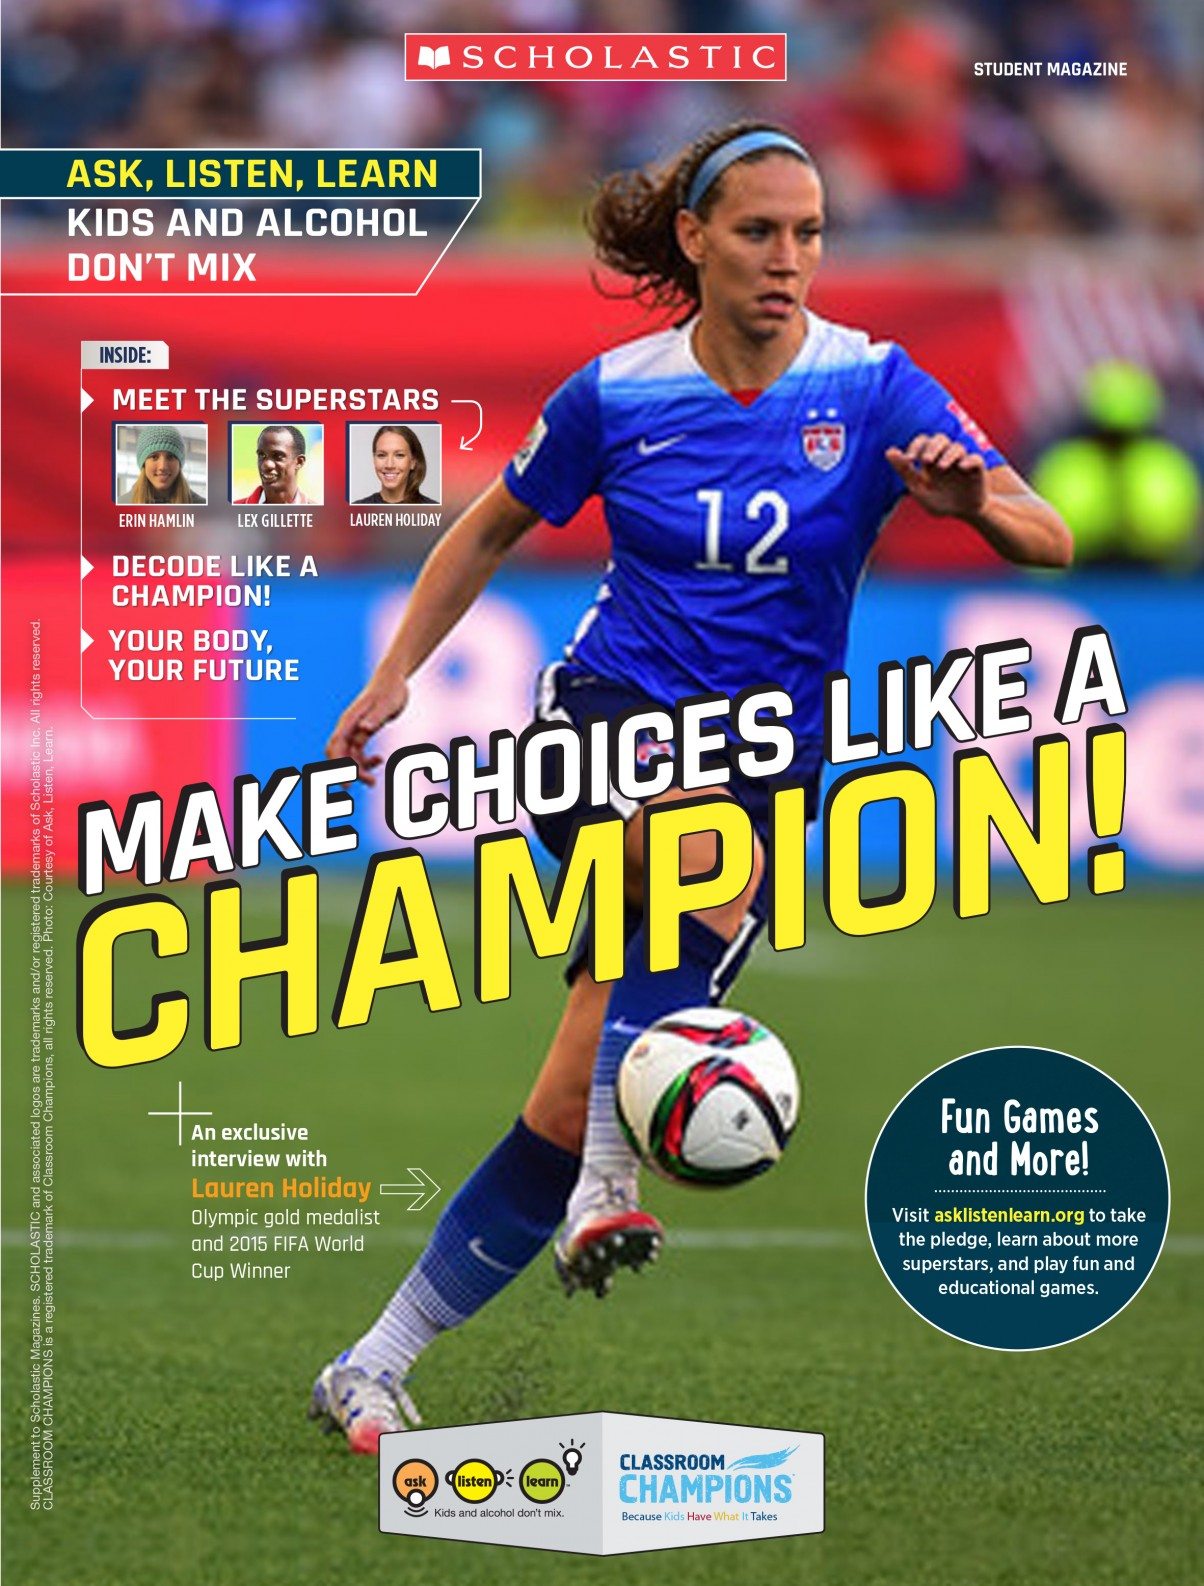 Scholastic Student Magazine with Lauren Holiday